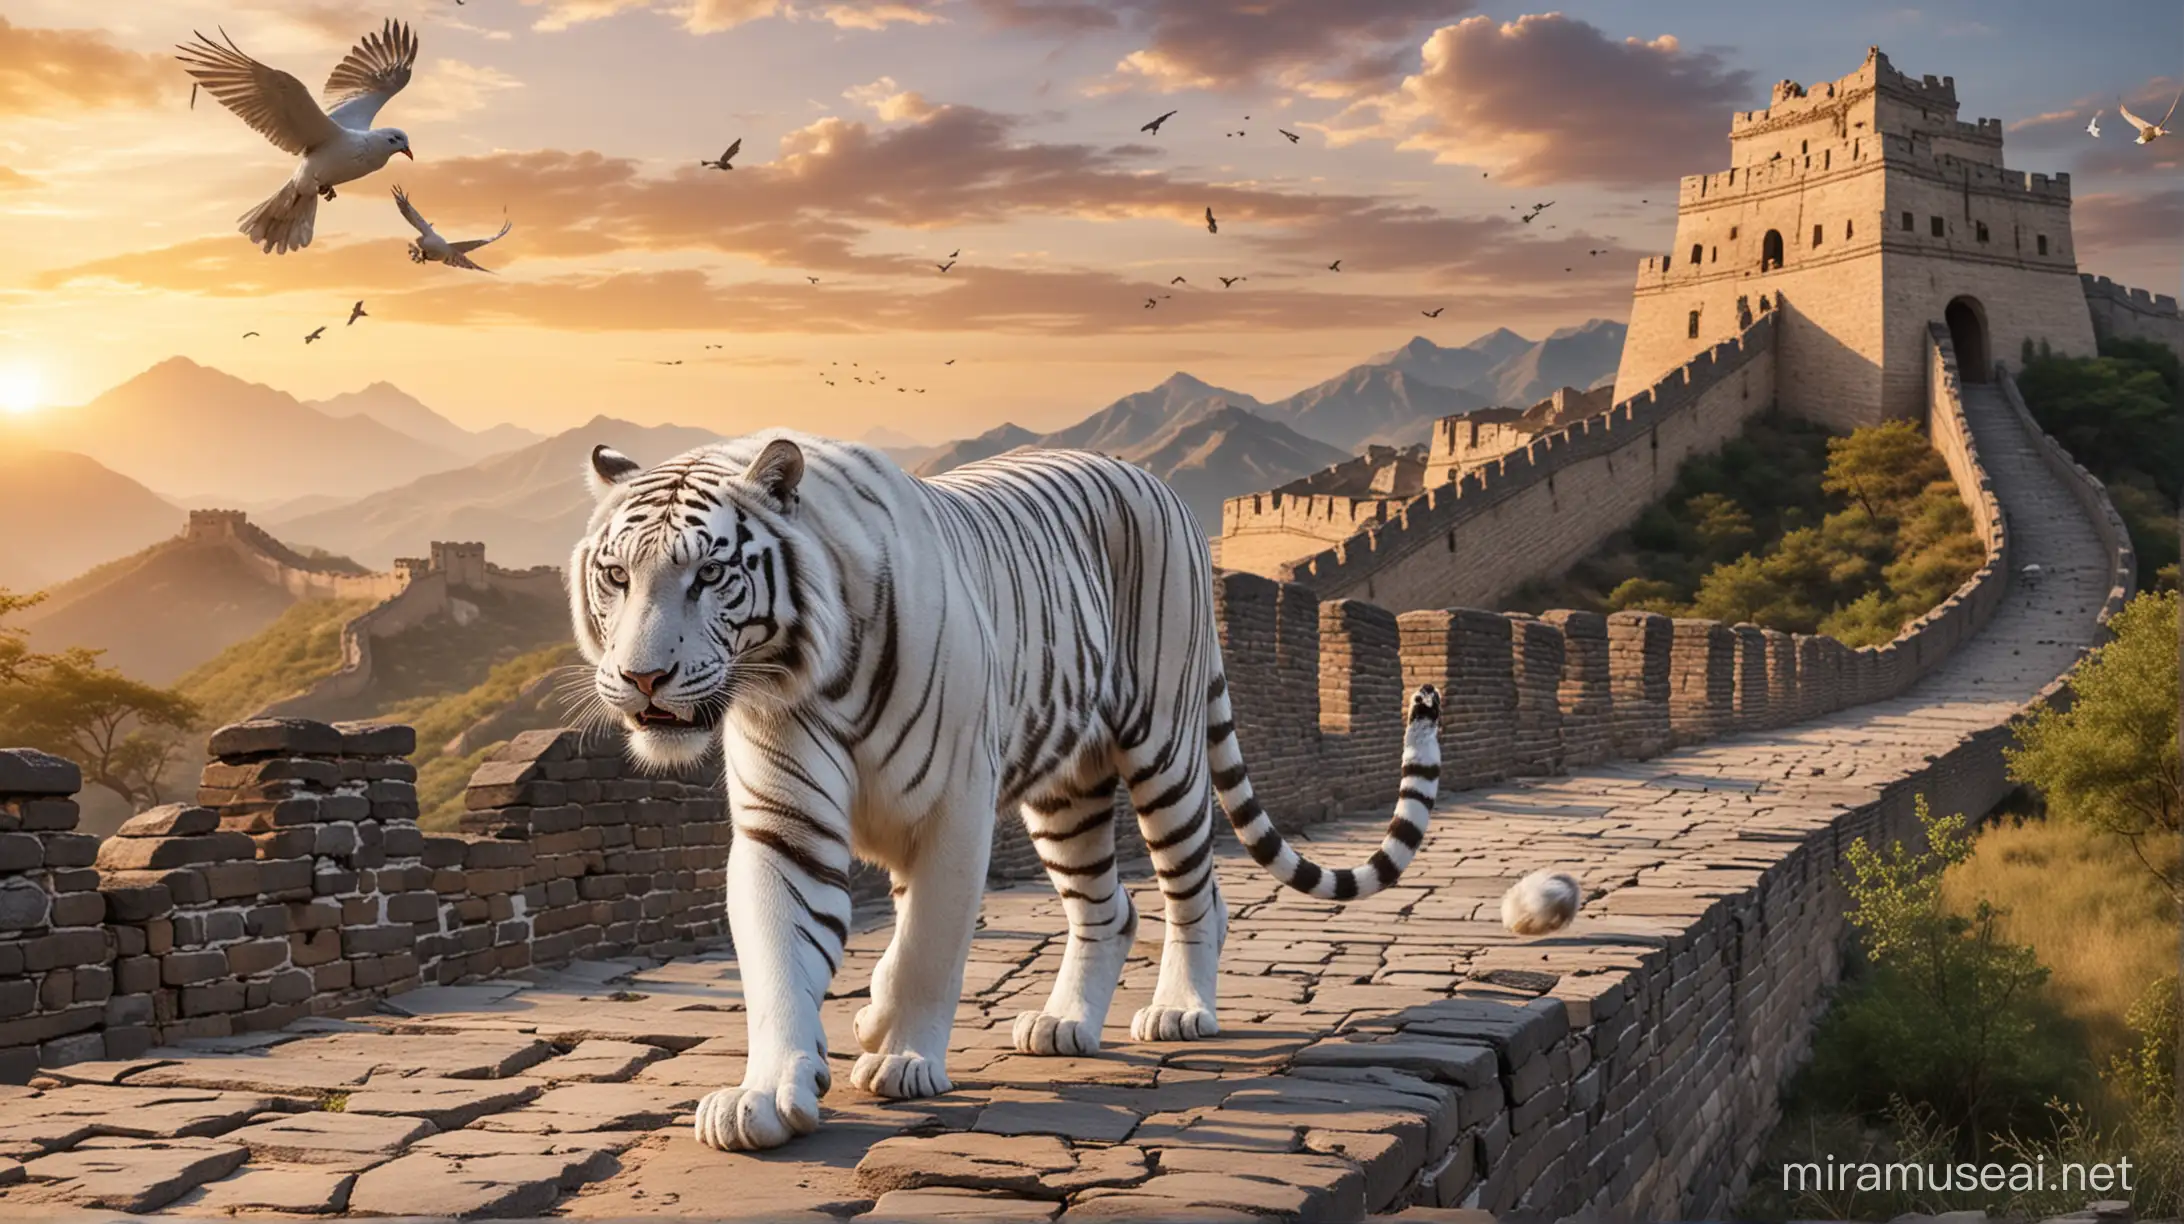 
 White tiger walking on the great wall of China. Time, sunset. Background, mountains. Doves in the sky. Grass in front, left hand side.